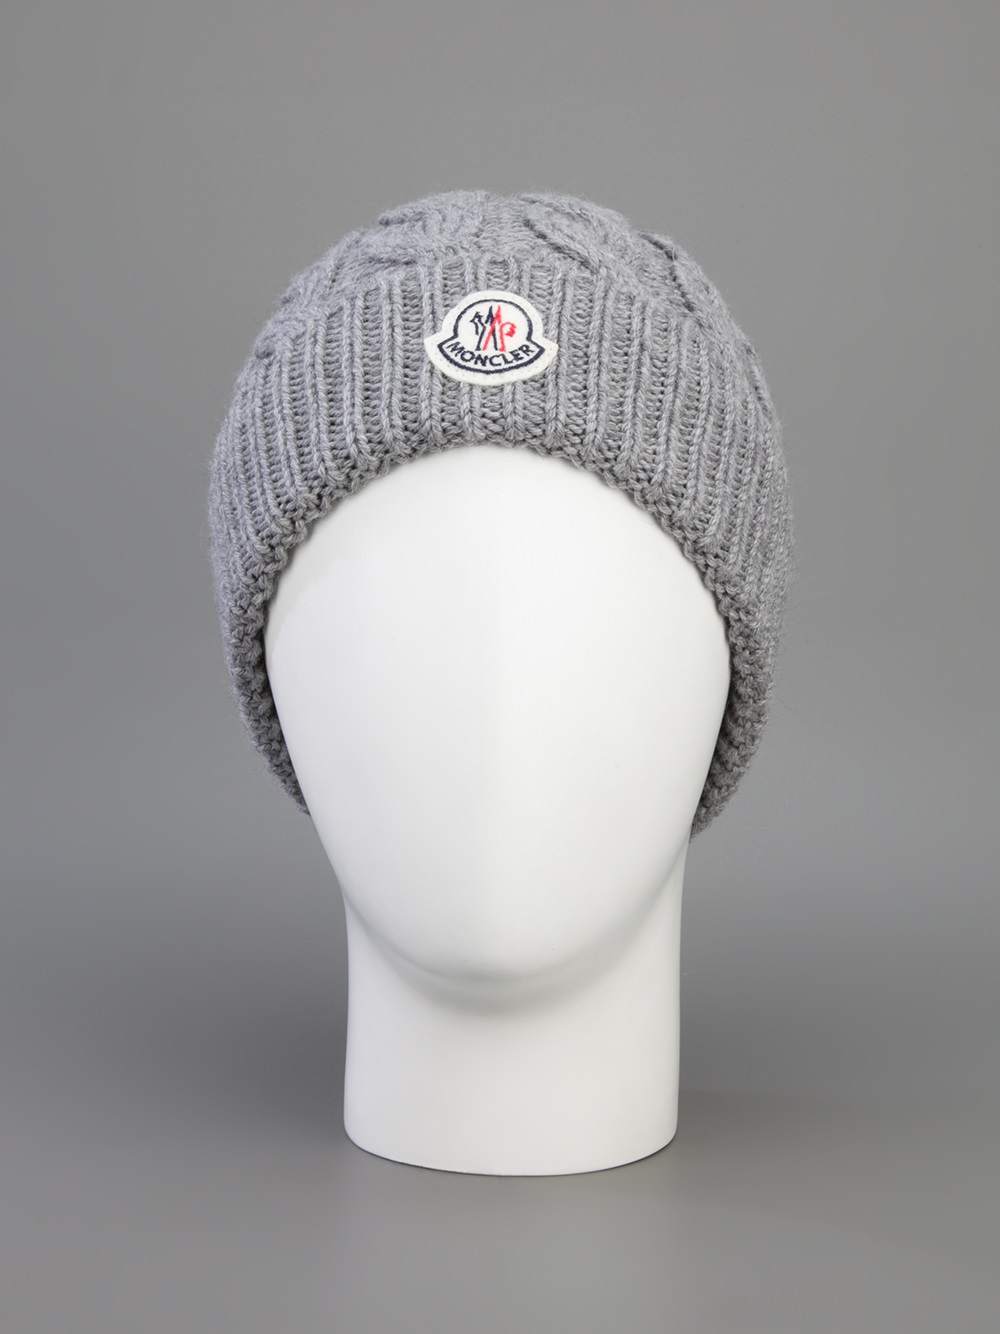 Moncler Cable Knit Beanie Hat in Grey (Gray) for Men - Lyst